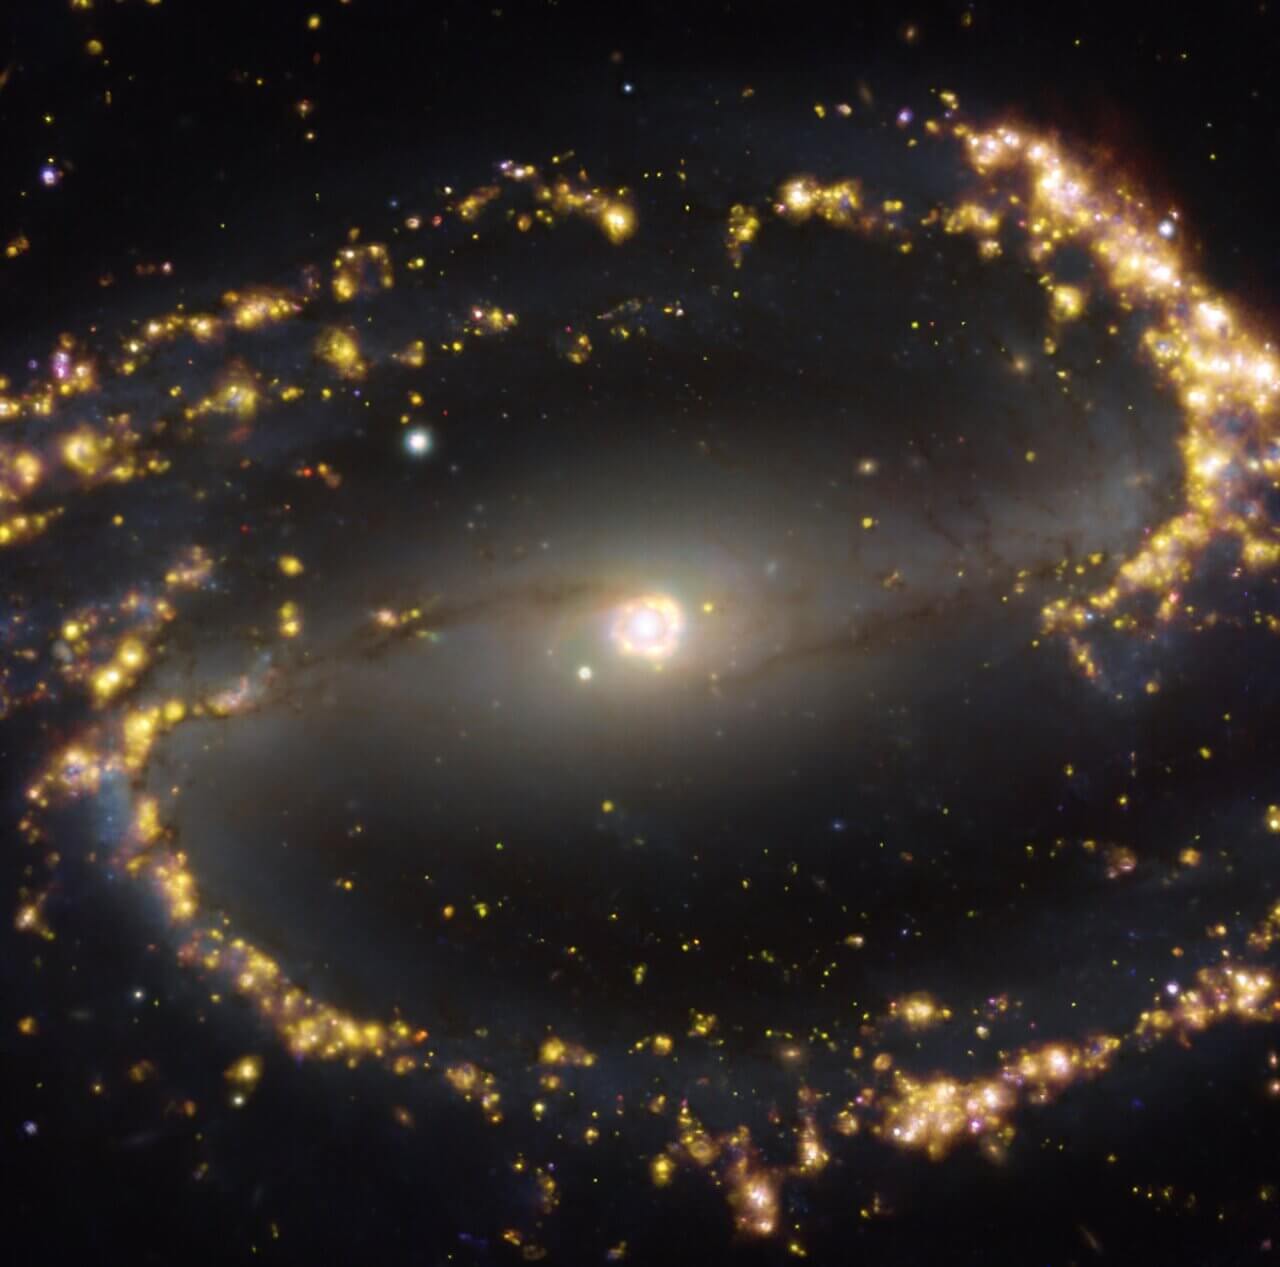 A spiral galaxy, quite sparse and scattered, with a bright core.